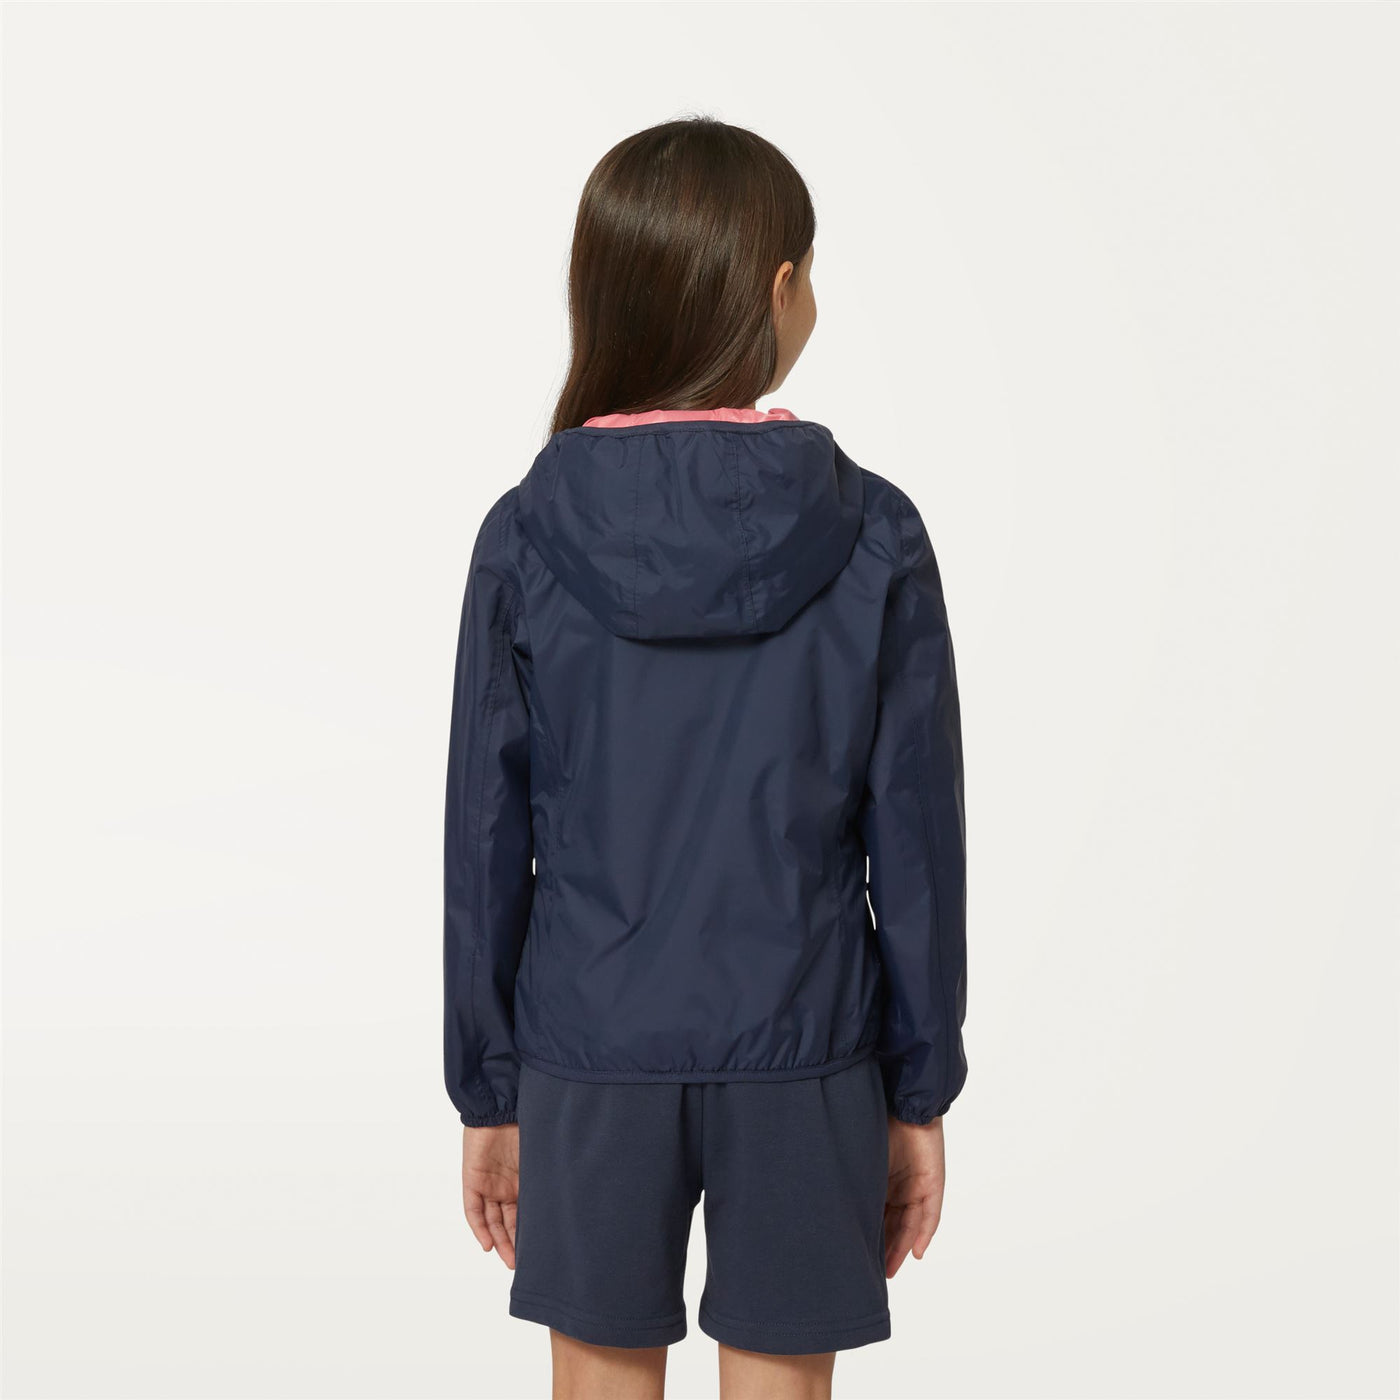 Jackets Girl P. LILY PLUS.2 DOUBLE Short BLUE D-PINK MD Dressed Front Double		